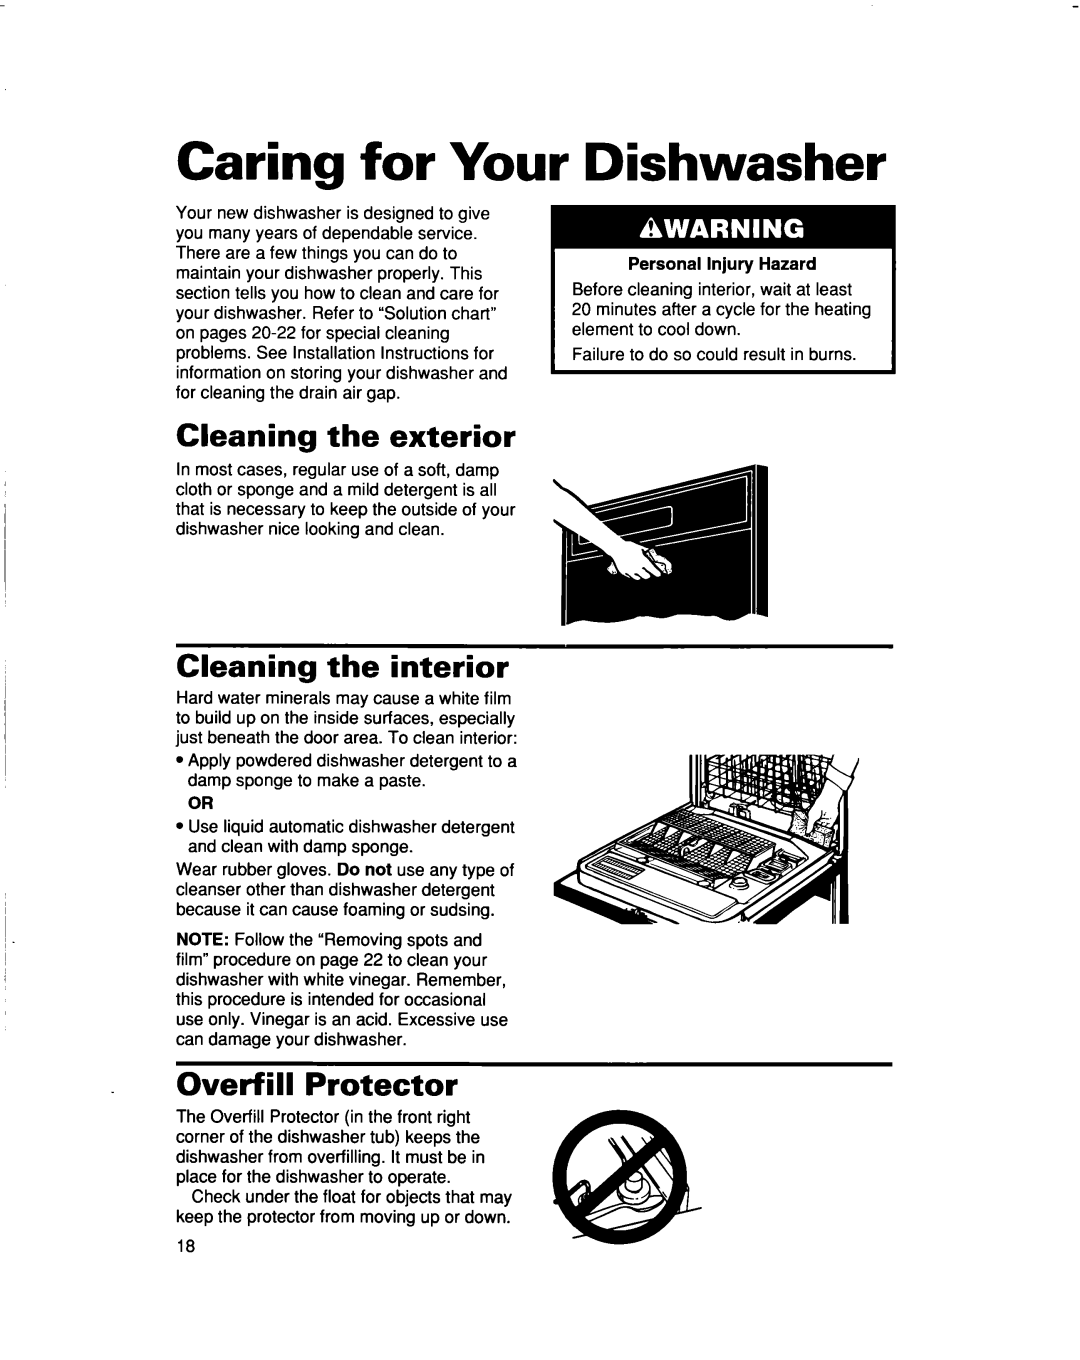 Whirlpool 960 Series warranty Caring for Your, Dishwasher, Cleaning the exterior, Cleaning the interior, Overfill Protector 